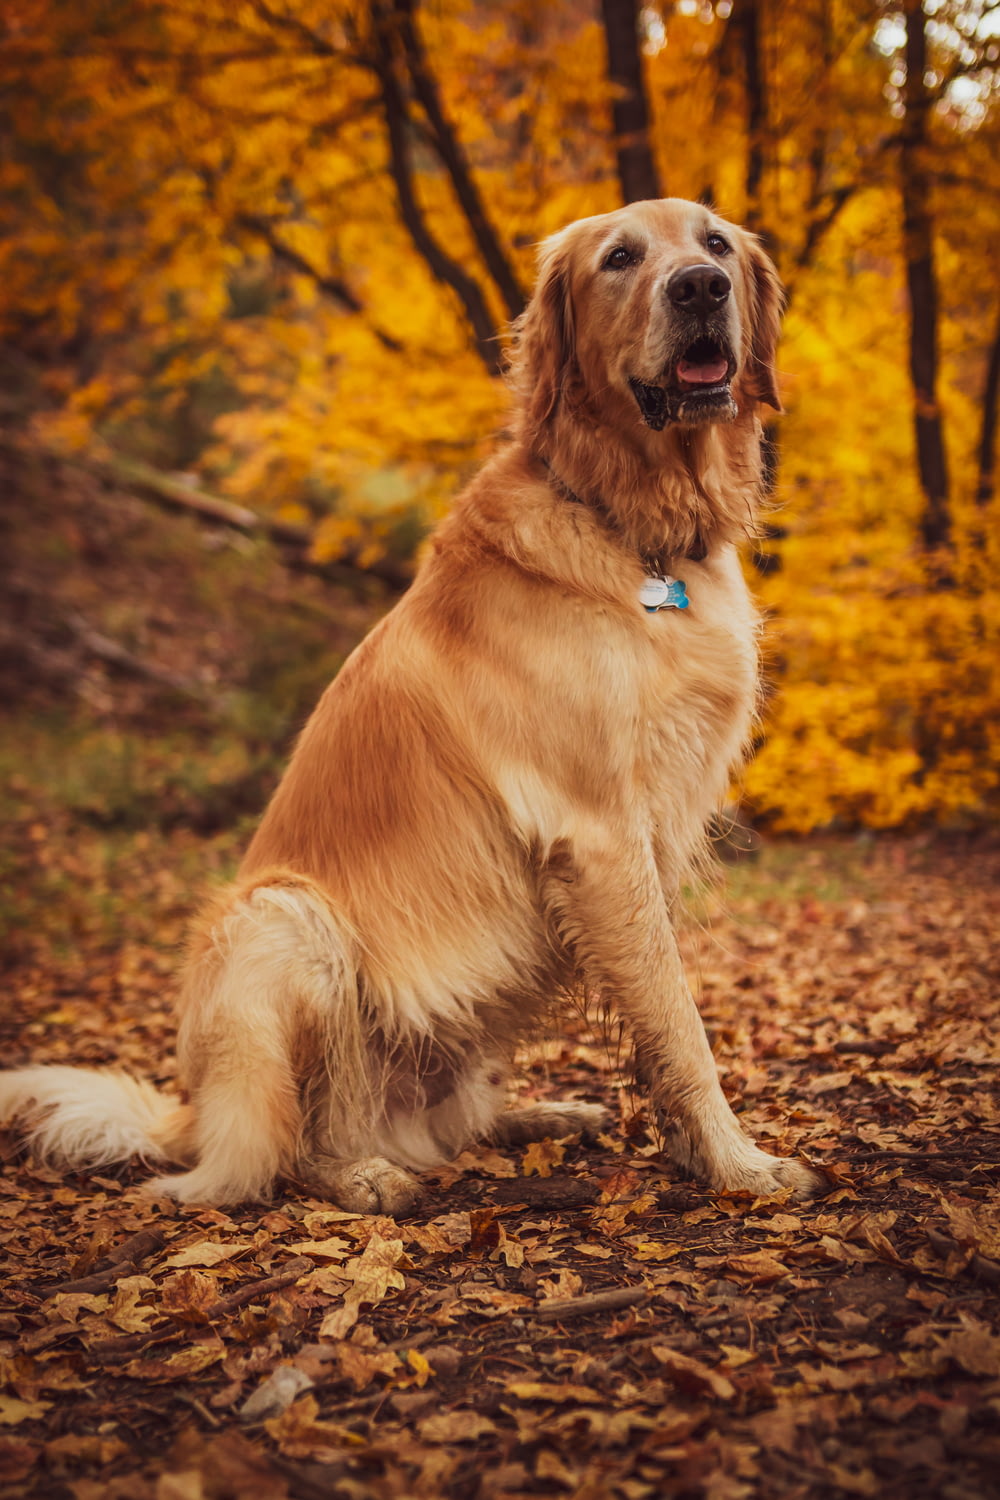 a golden retriever sitting in the leaves in a wooded area